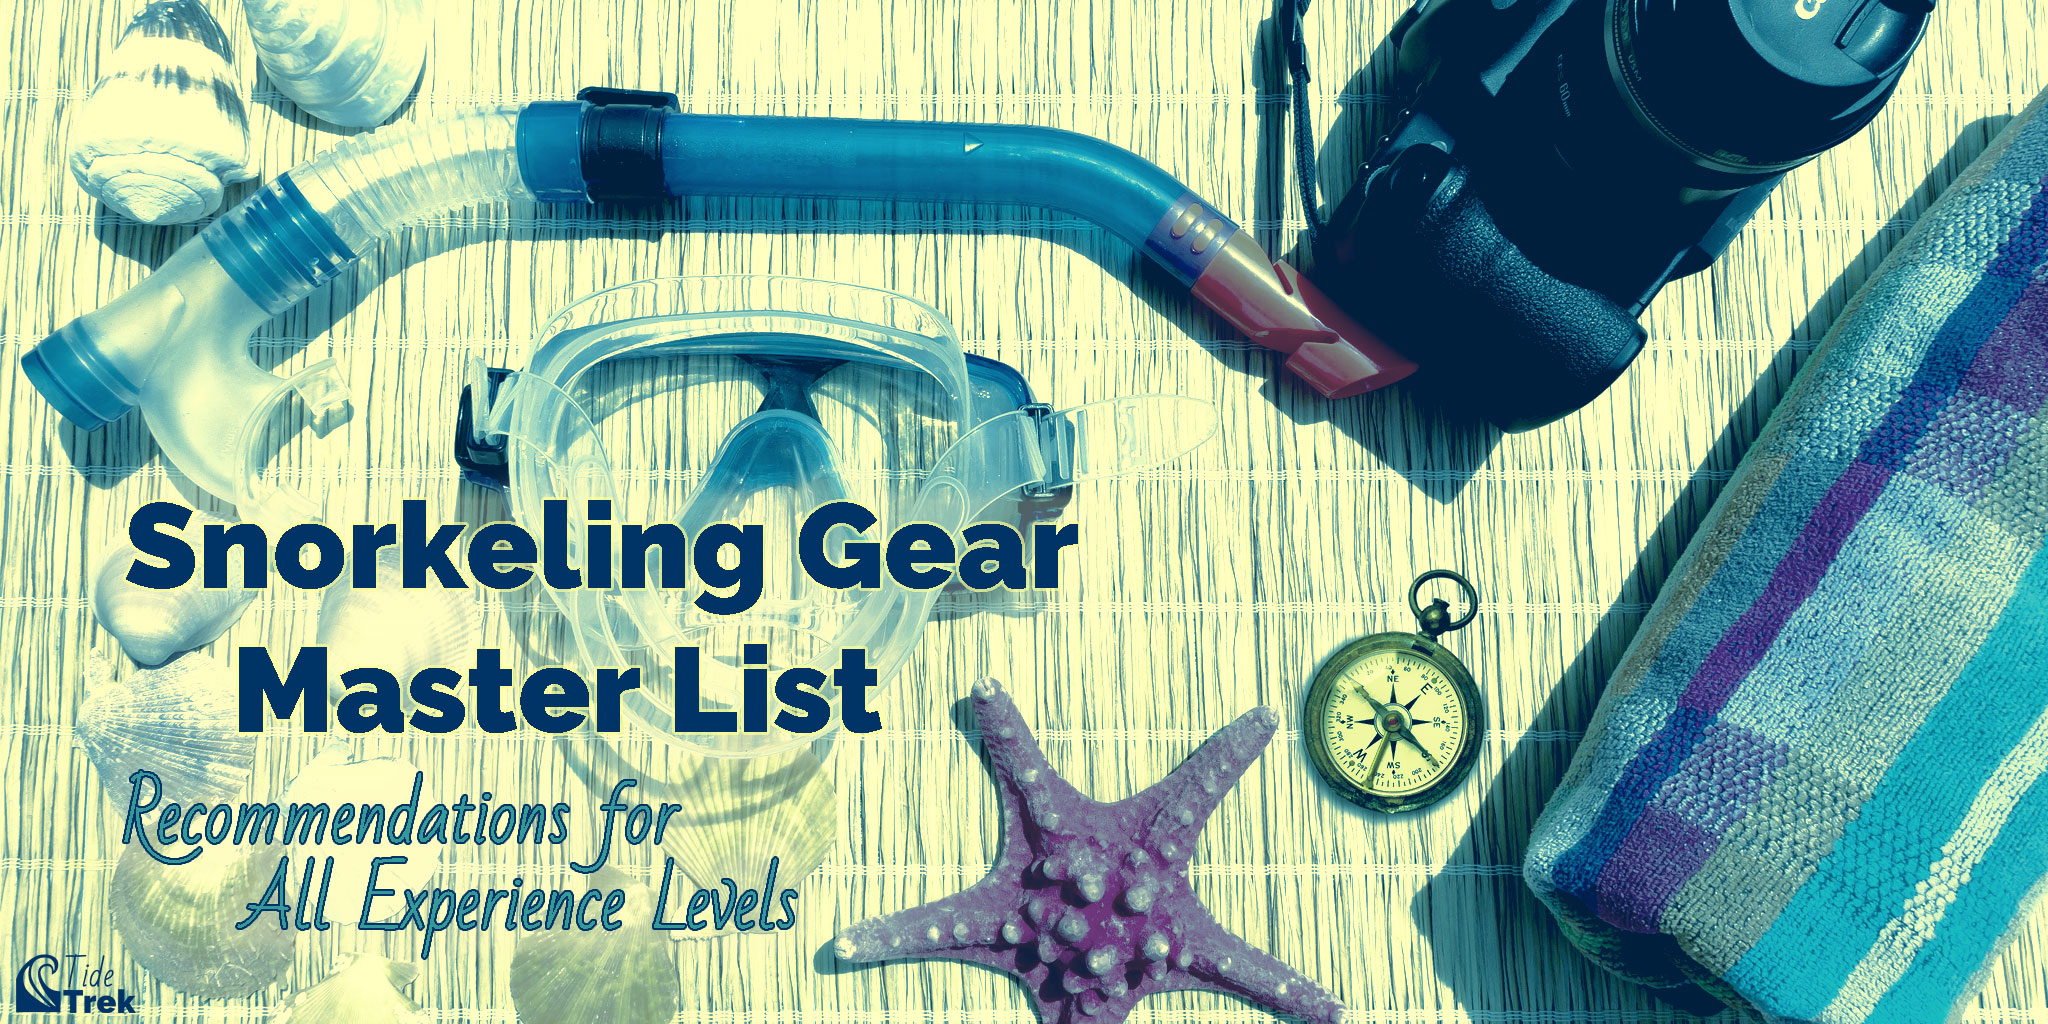 Tide Trek snorkeling gear master list. Recommendations for all experience levels.